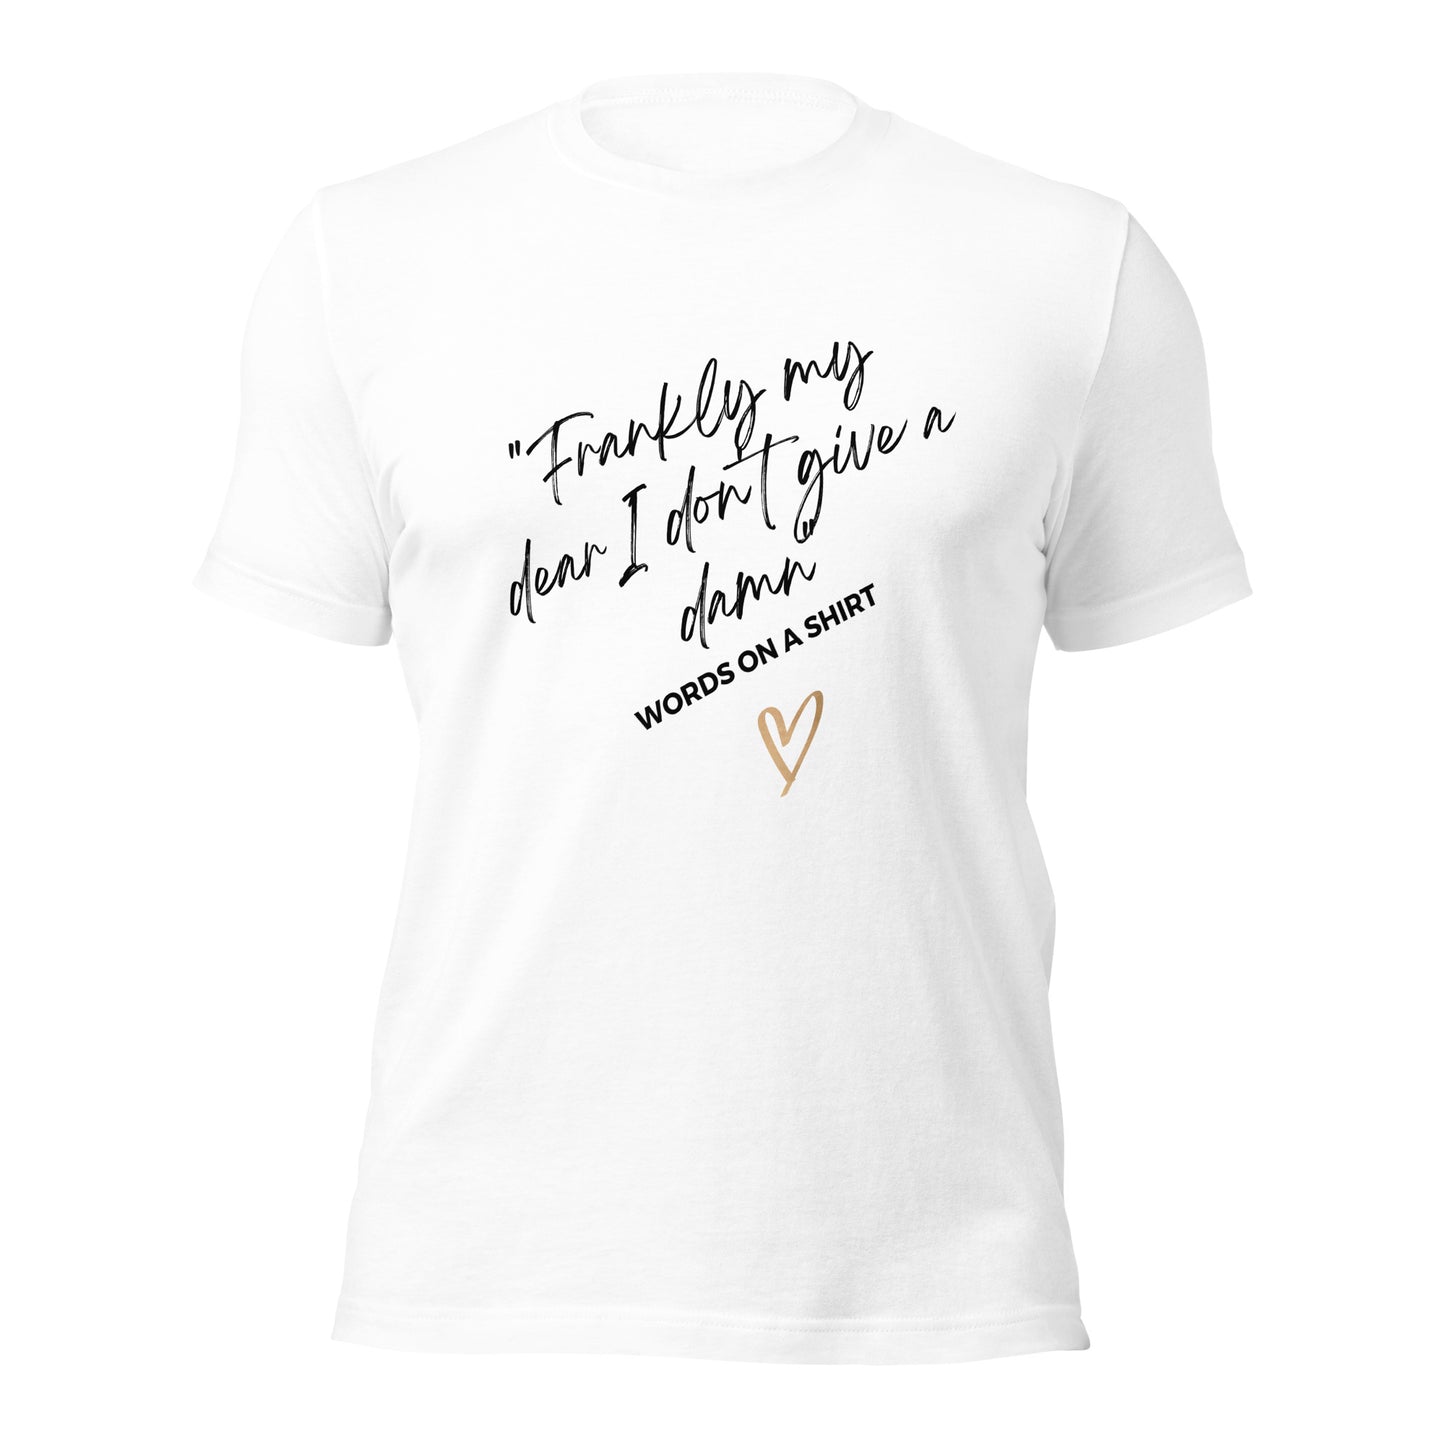 You just can't go wrong with this offer - indulge in the highest quality 100% cotton, pre-shrunk fabric for a perfect fit, and show your love for Gone With The Wind with the iconic "Frankly My Dear, I Don't Give A Damn" quote - why pass it up? This is one you won't want to miss - add it to your cart now!